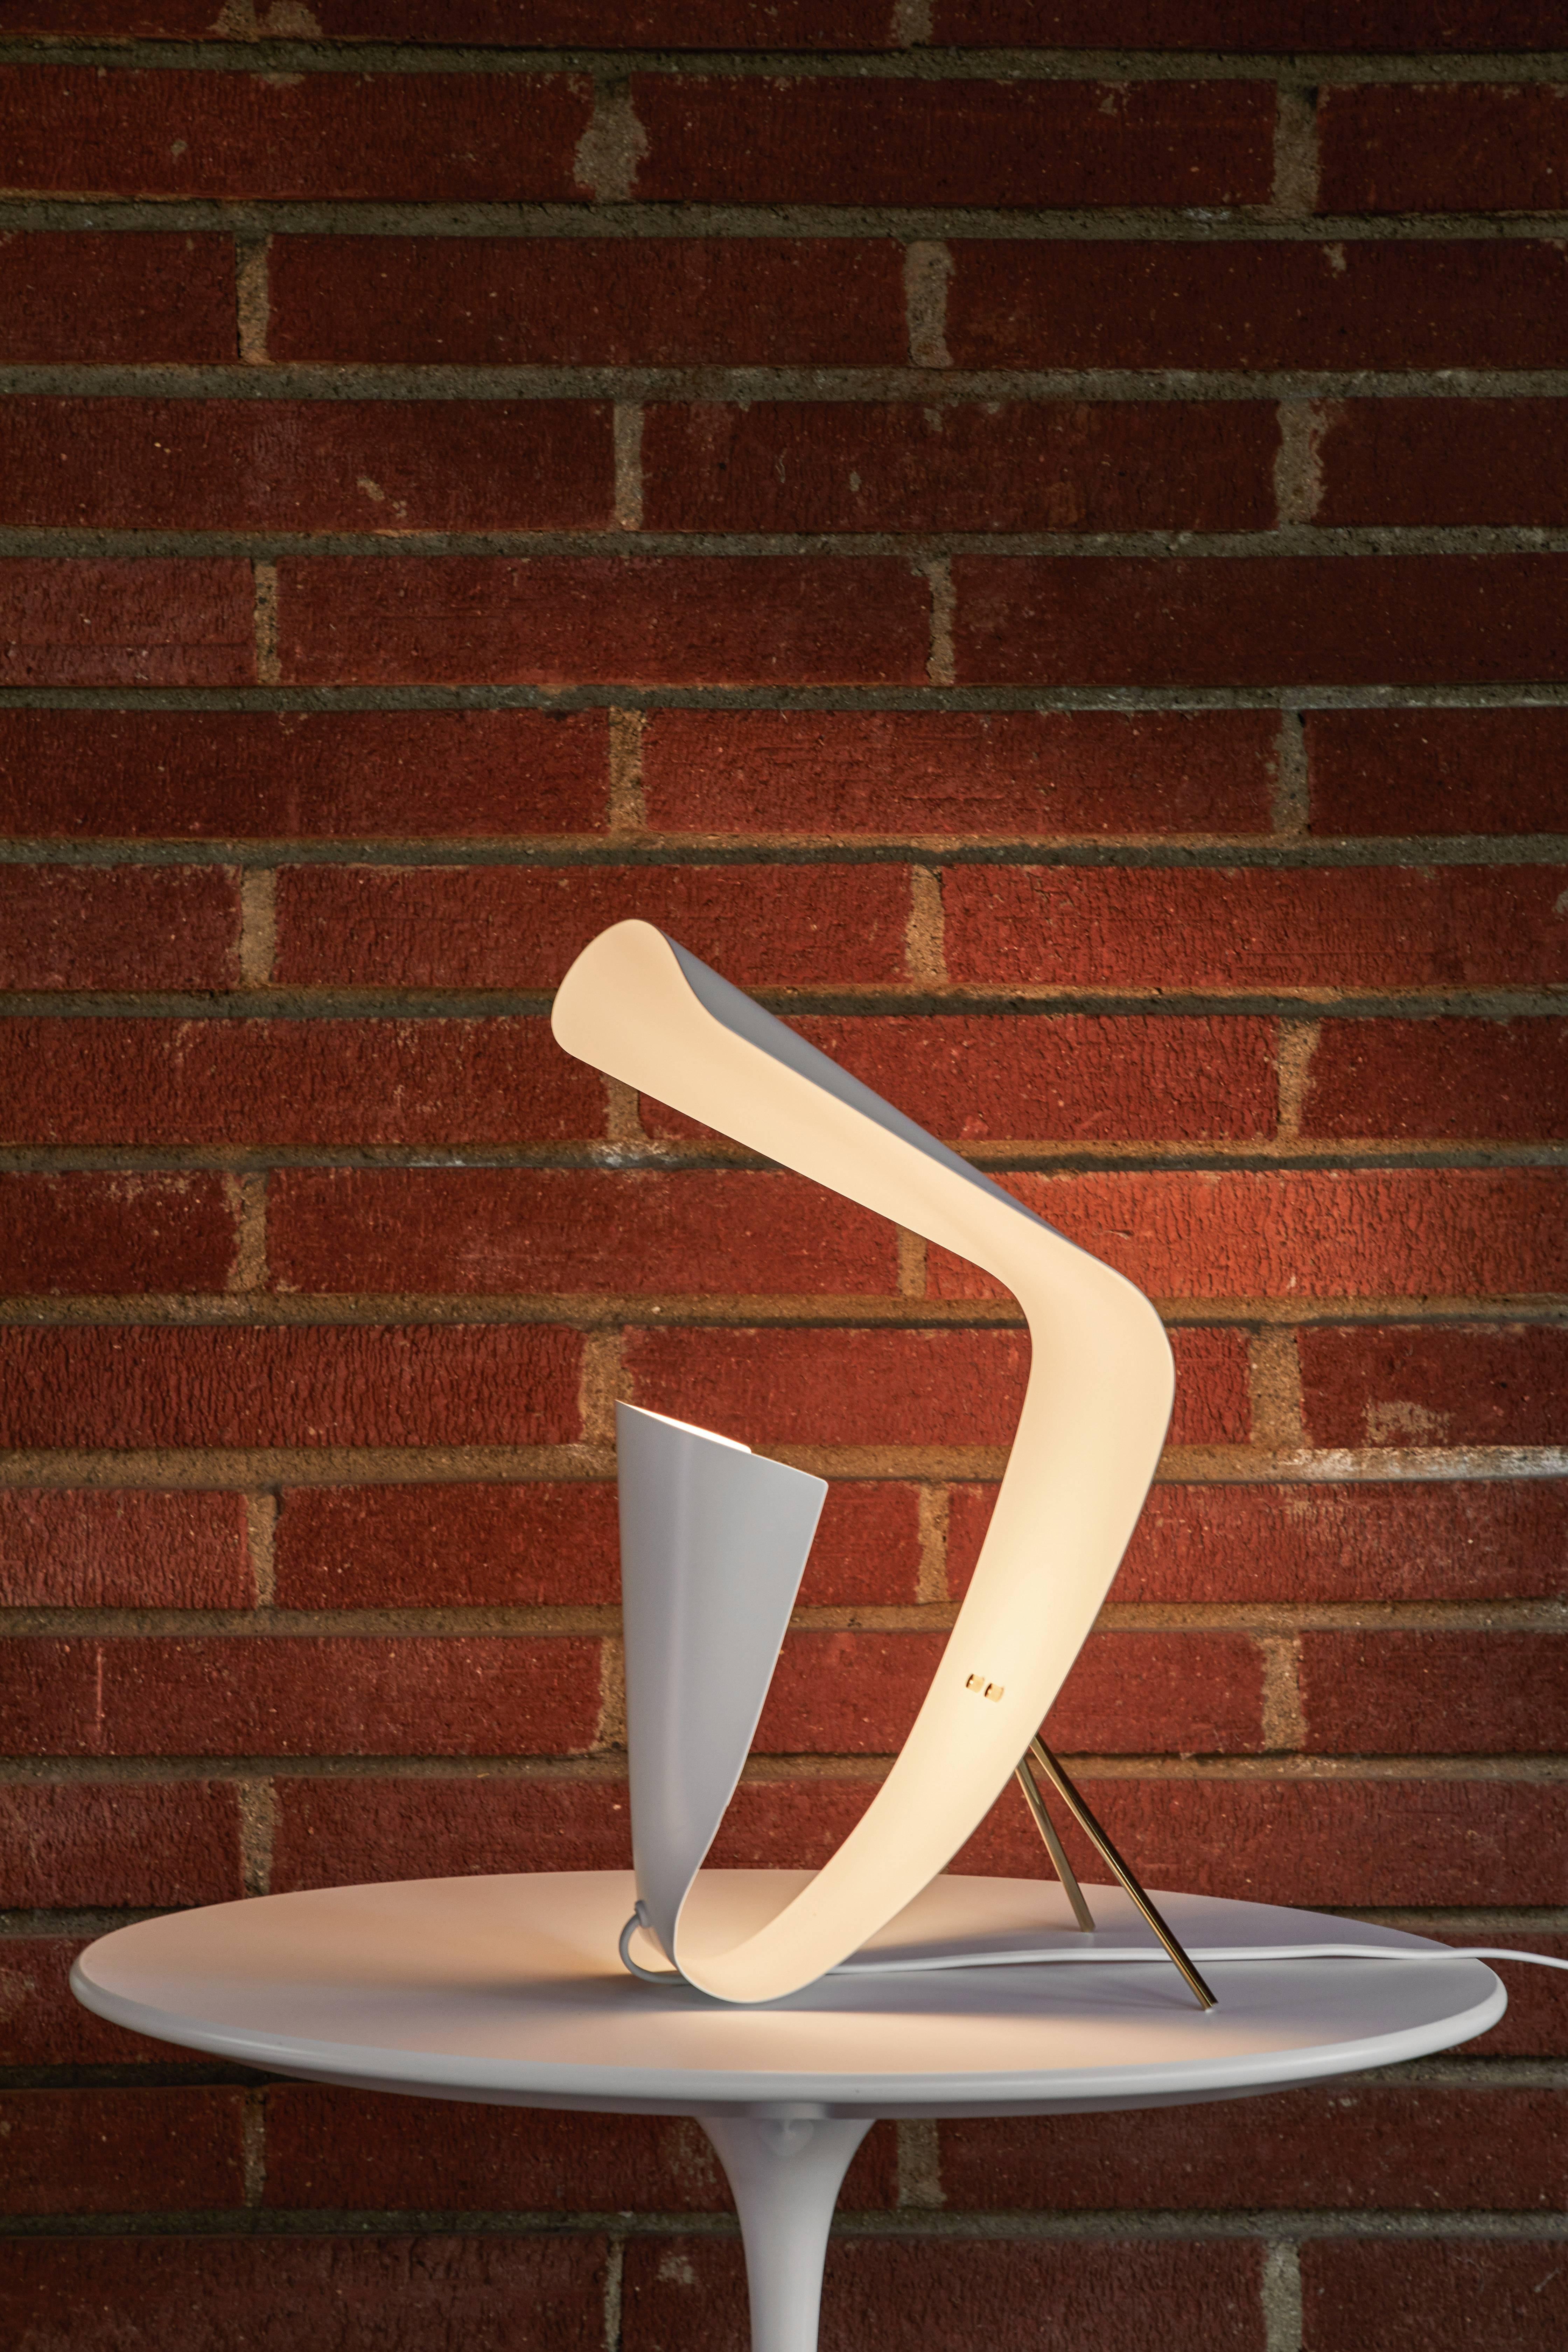 Michel Buffet 'B 201' white table lamp. Originally designed in 1953, this clean pair was acquired in France in the 2010s and are part of a more recent authorized re-edition made with many of the same small-scale manufacturing techniques and